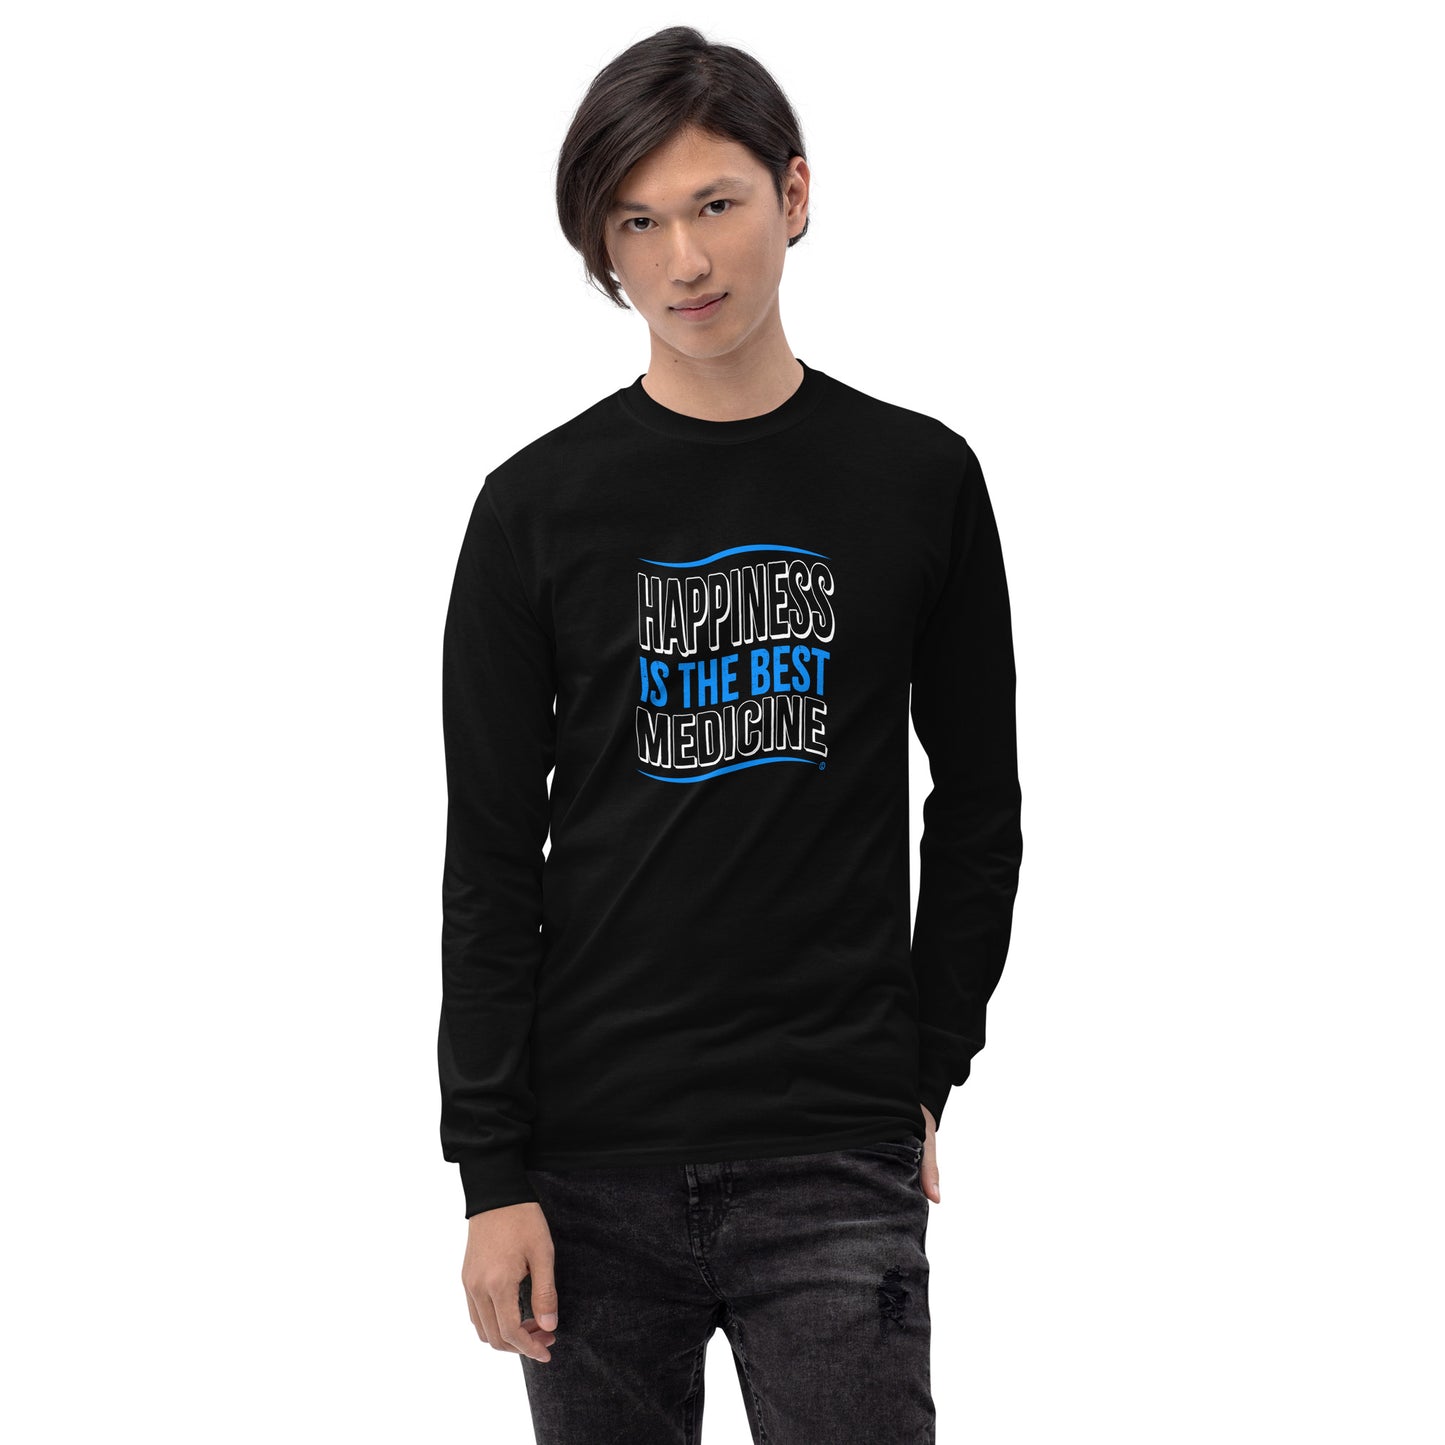 Happiness is the Best Medicine Unisex Long Sleeve Shirts